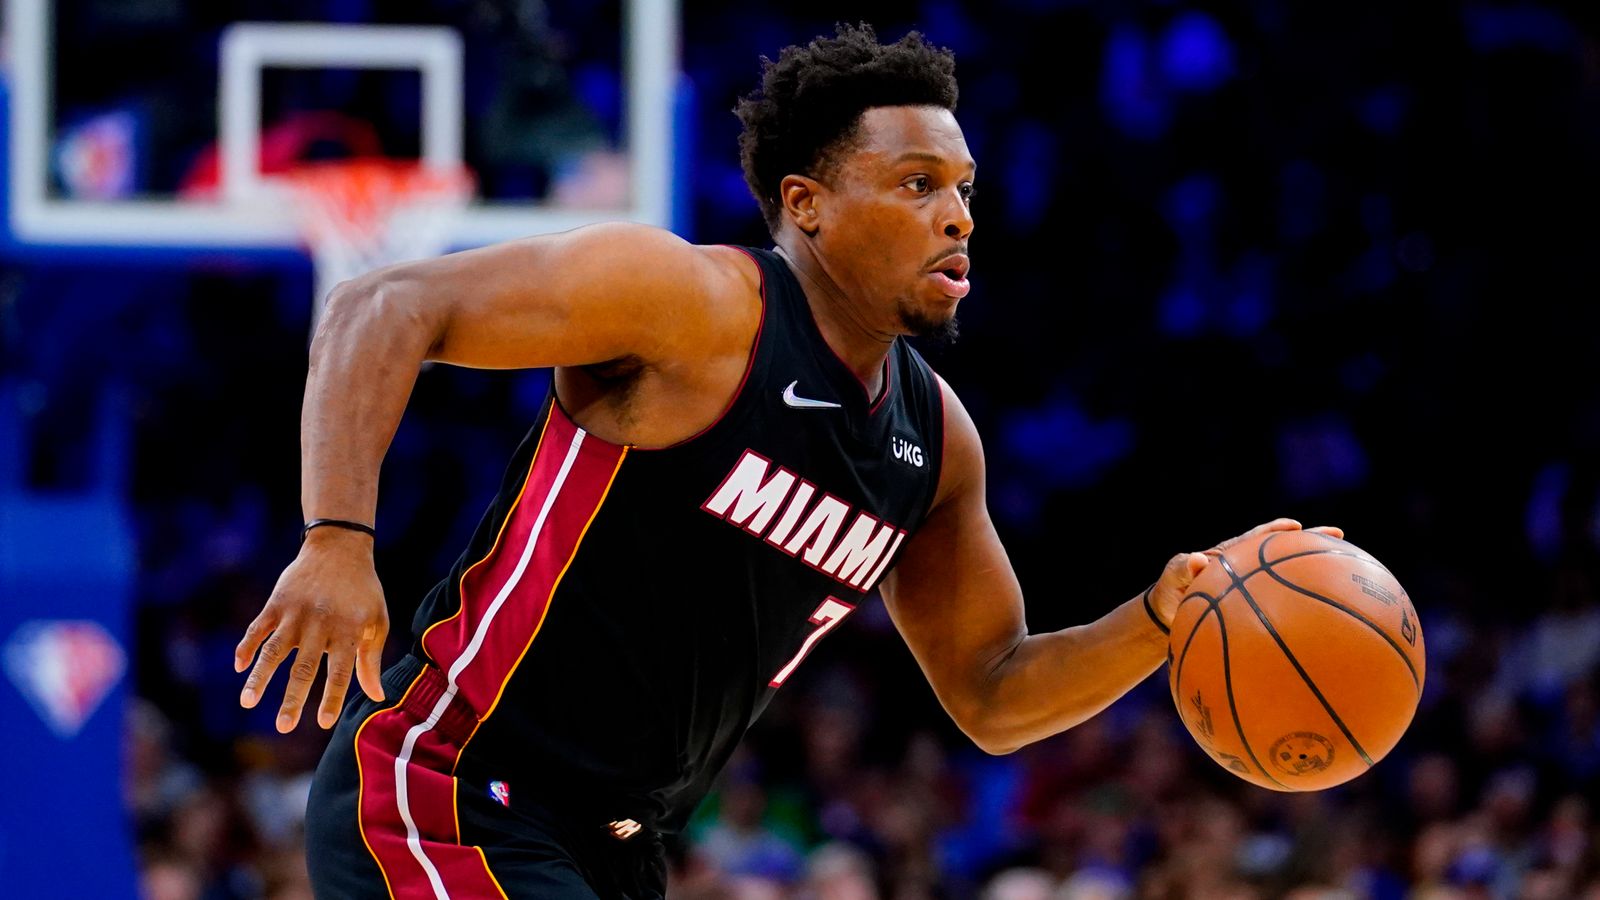 Miami Heat win Game 3 of NBA Eastern Conference finals - Articles